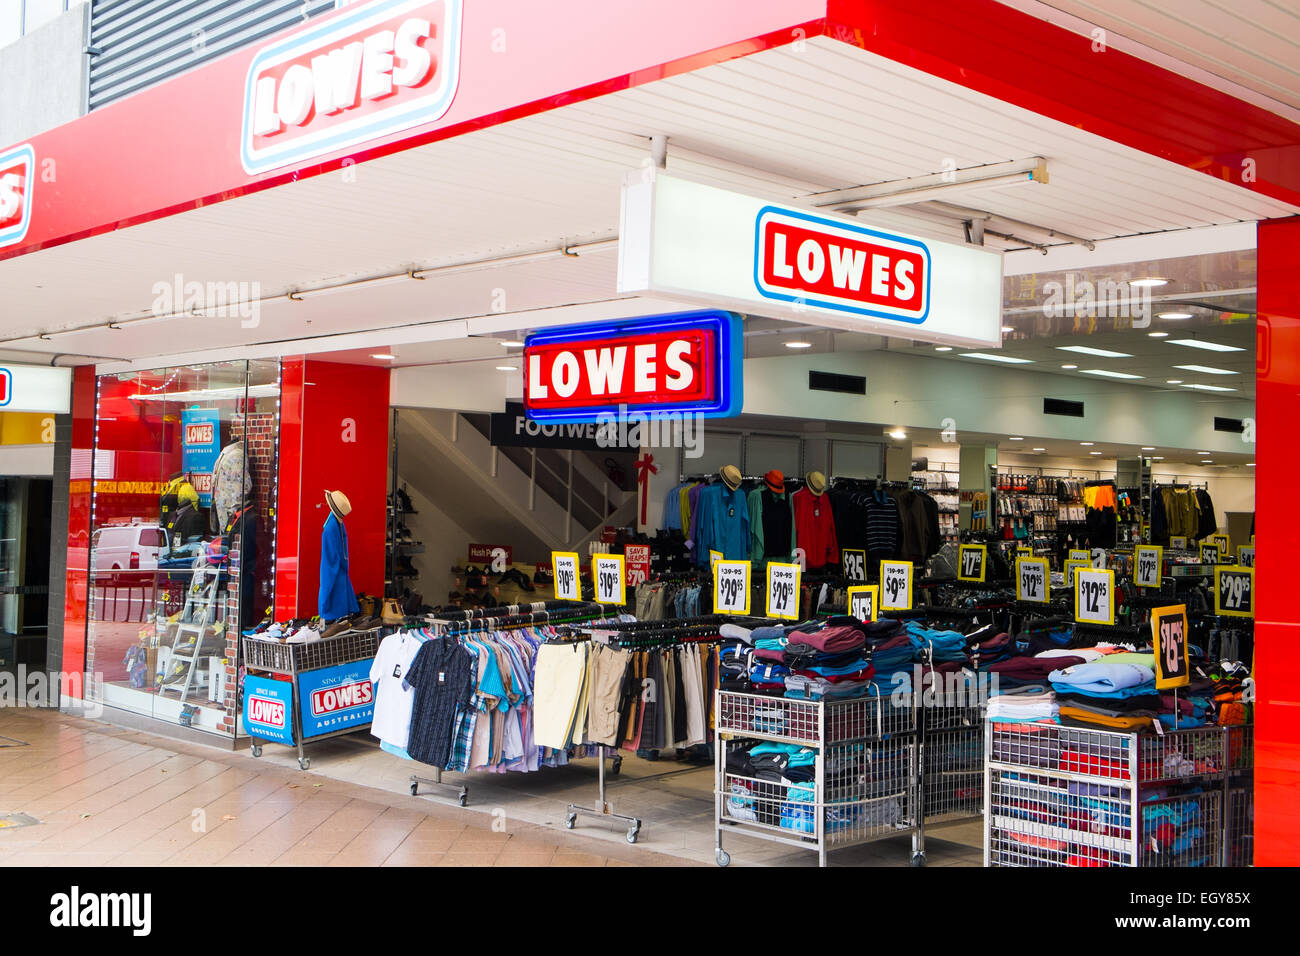 Lowes clothing store in victoria avenue,chatswood,sydney,australia Stock Photo